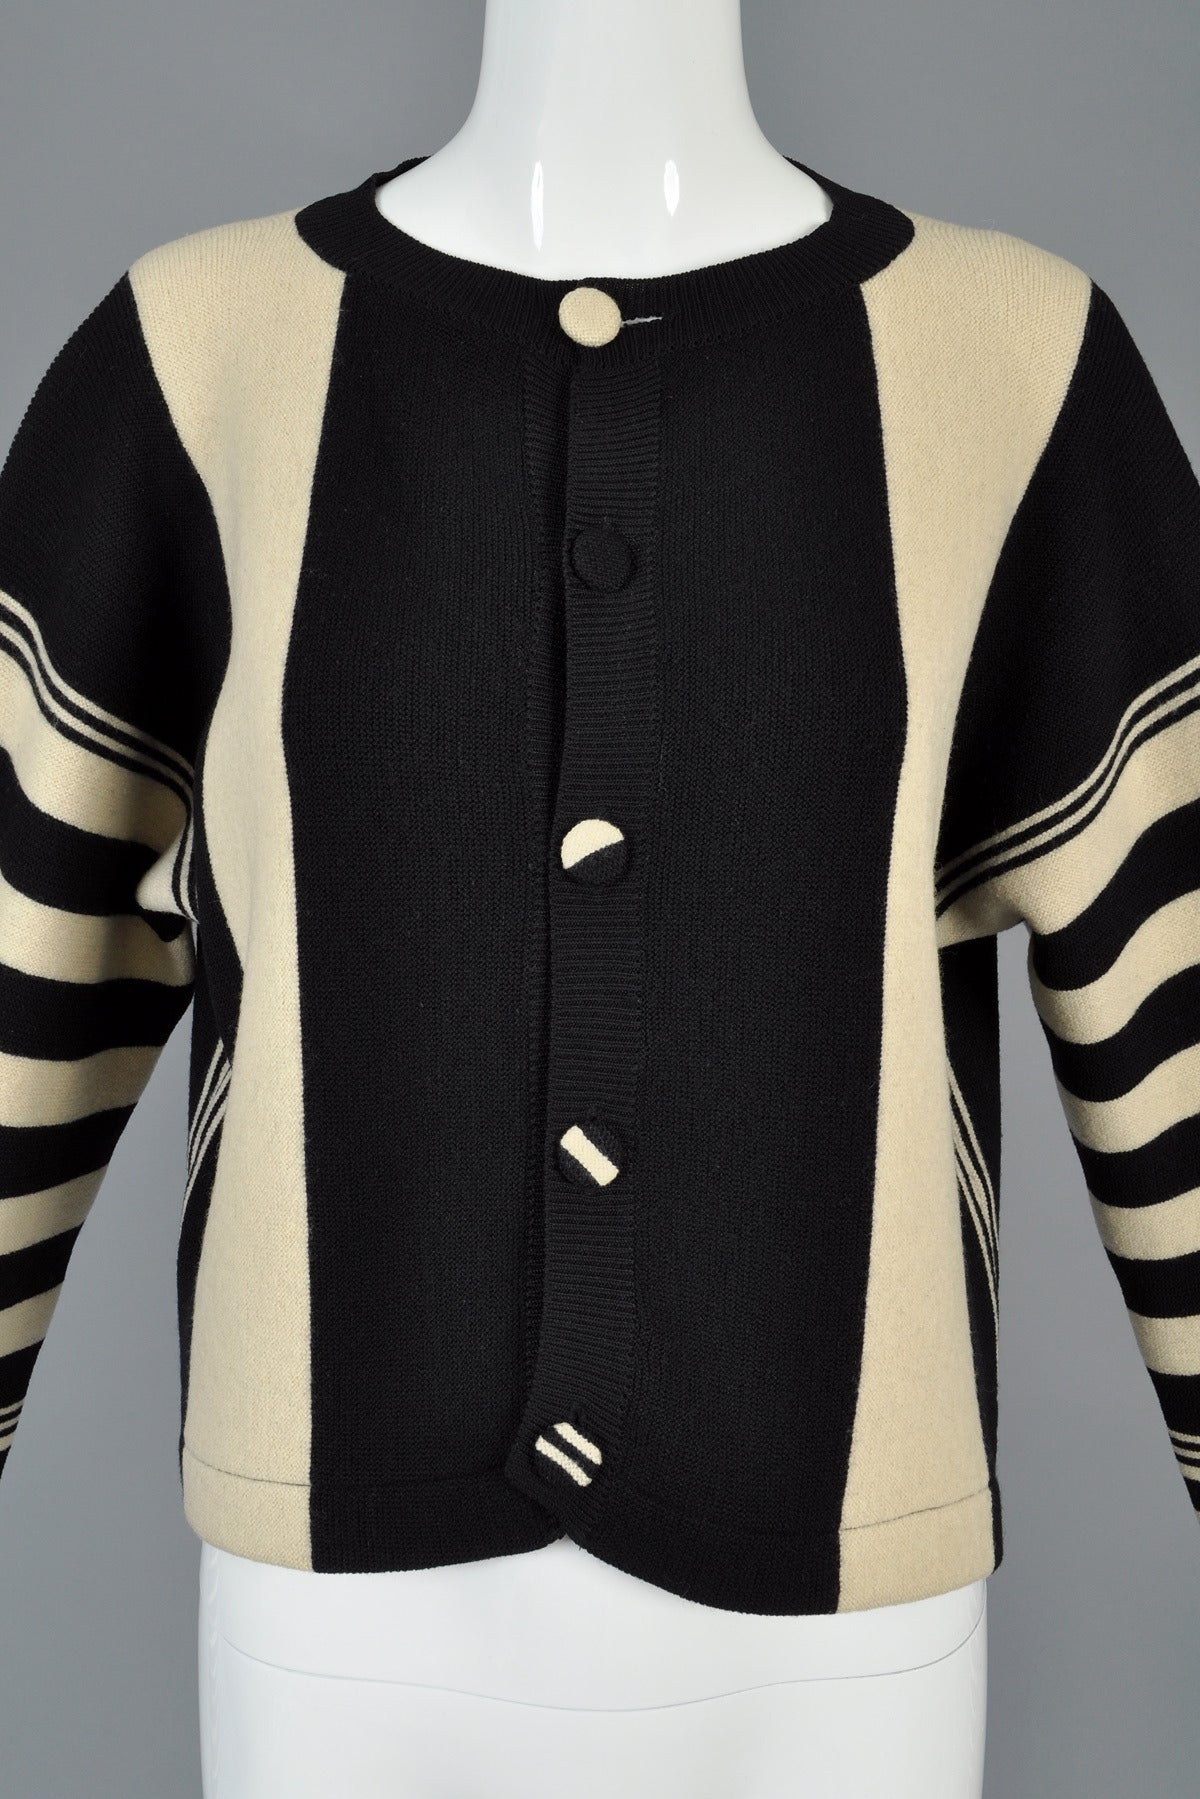 Workshop by Yohji Yamamoto Graphic Striped Cardigan Sweater In Excellent Condition In Yucca Valley, CA